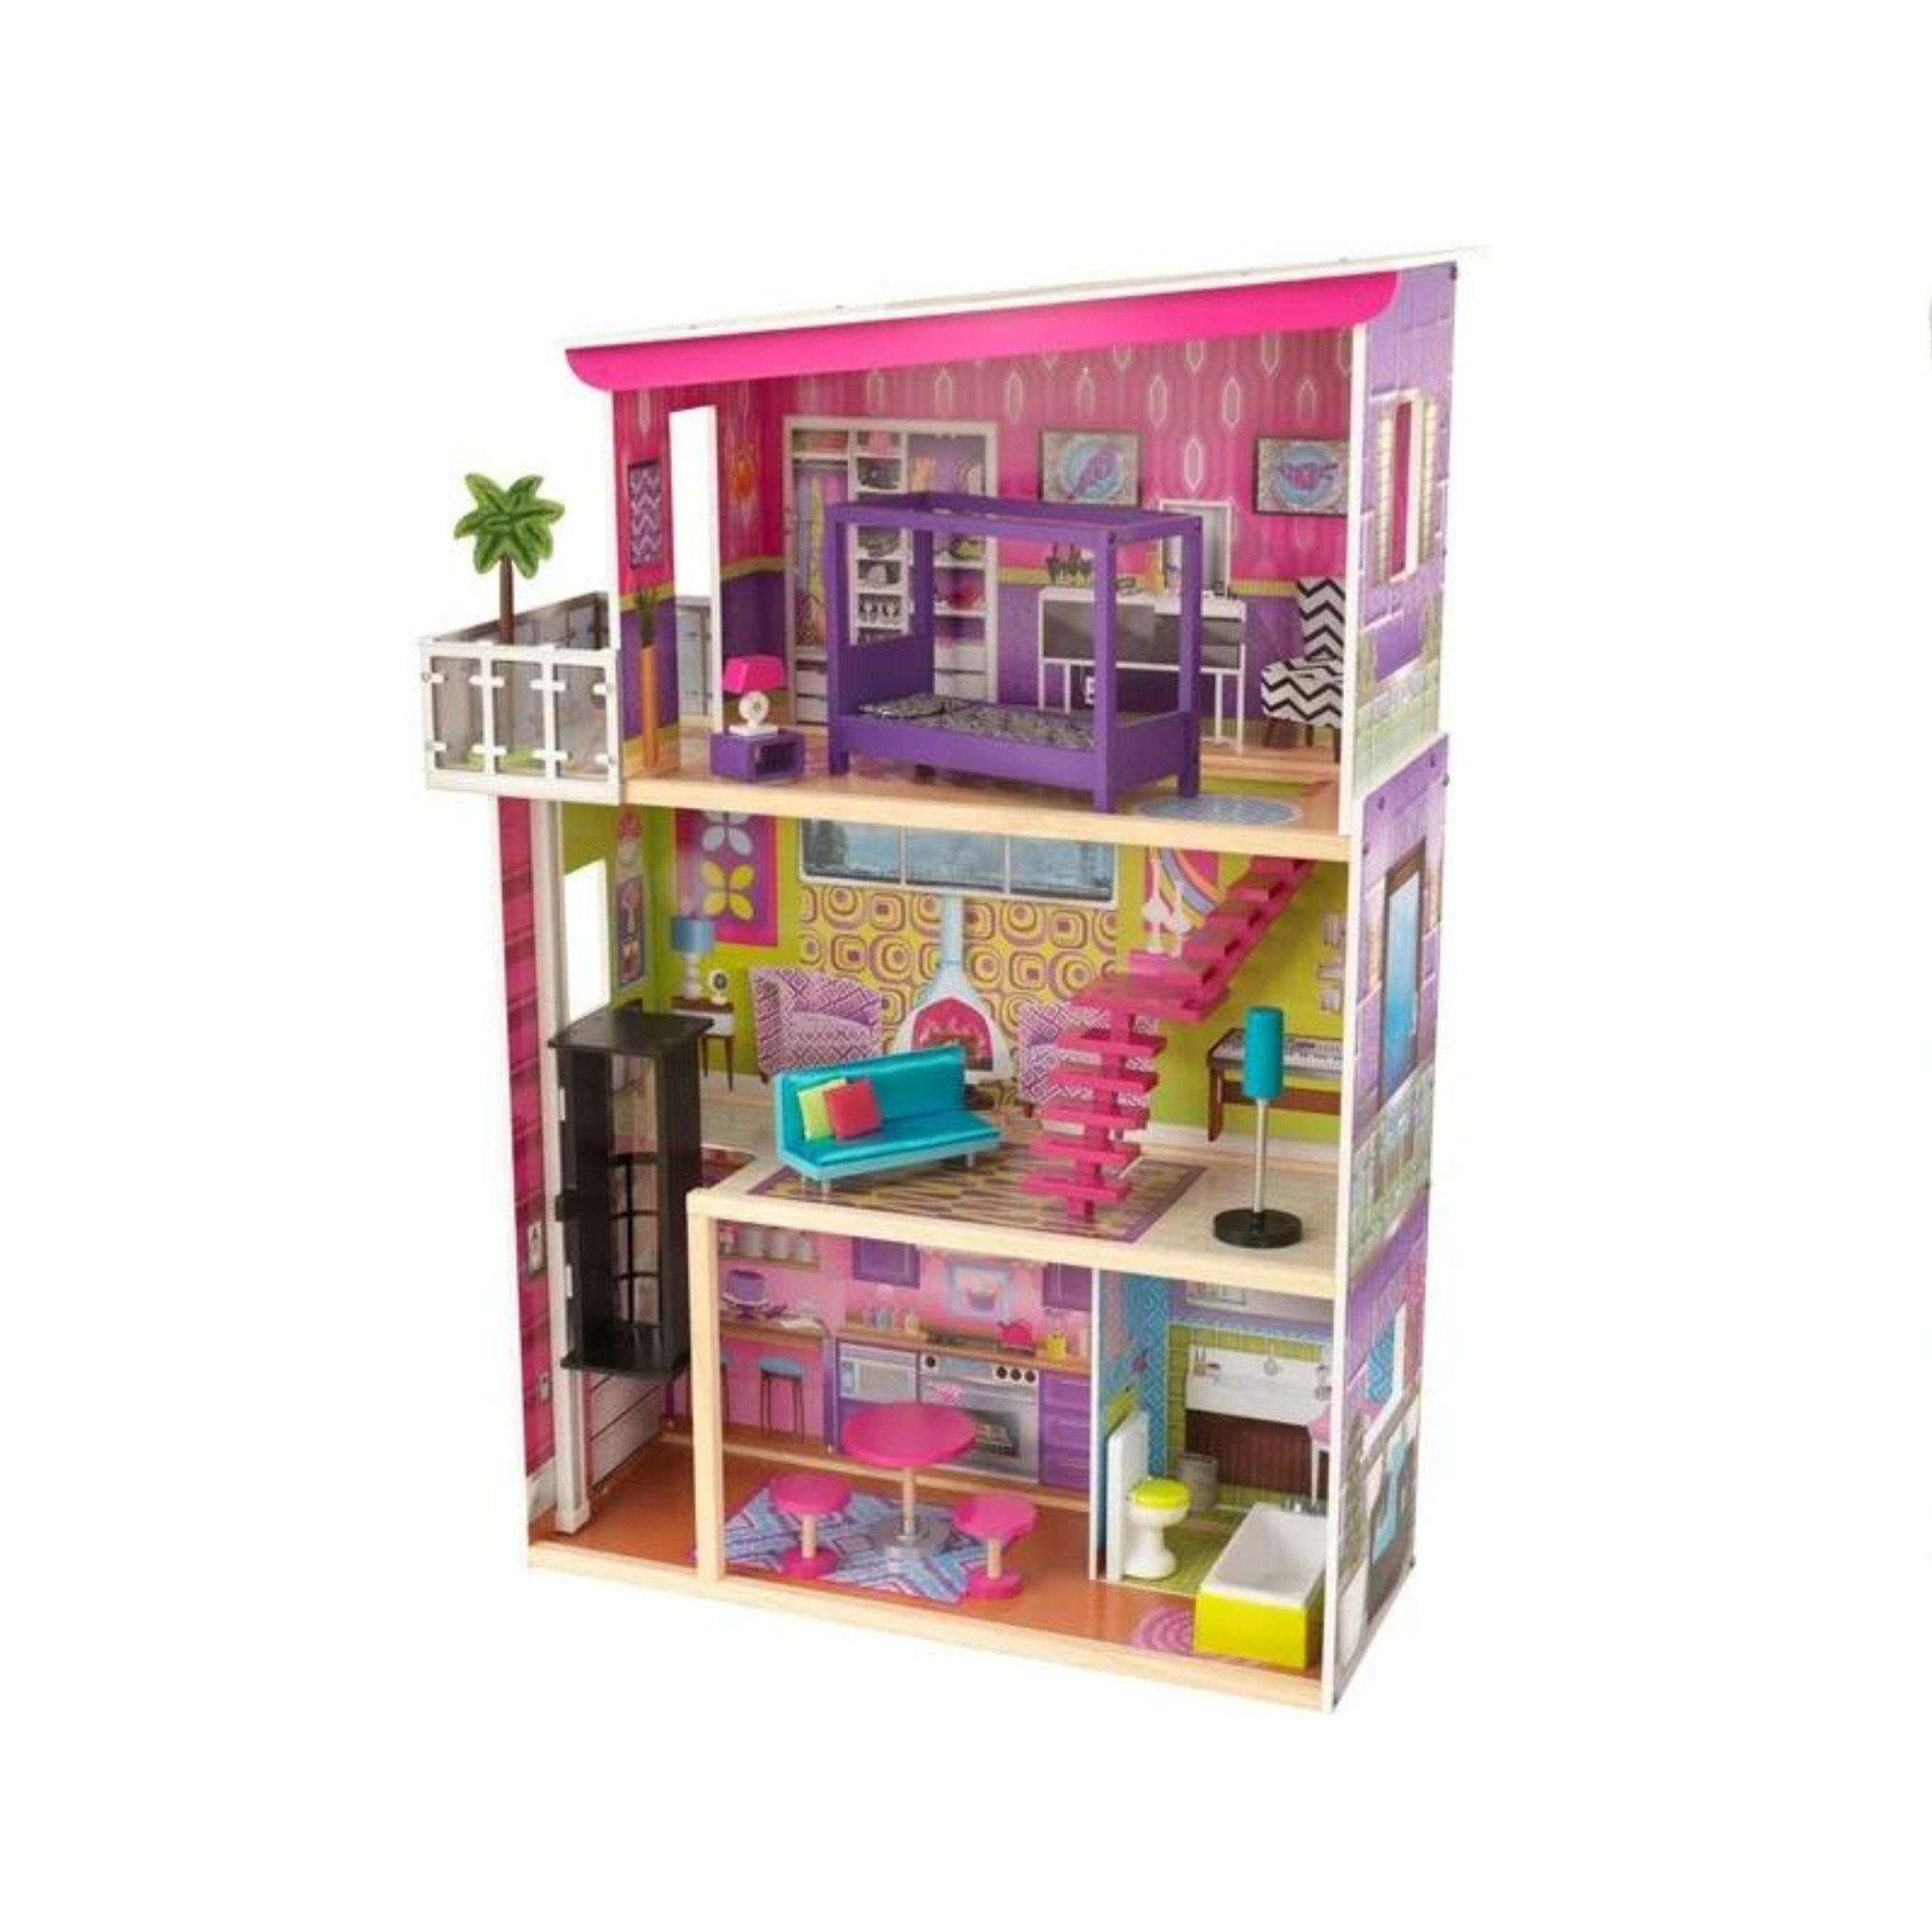 KidKraft Super Model Wooden Dollhouse with Elevator and 11 Accessories